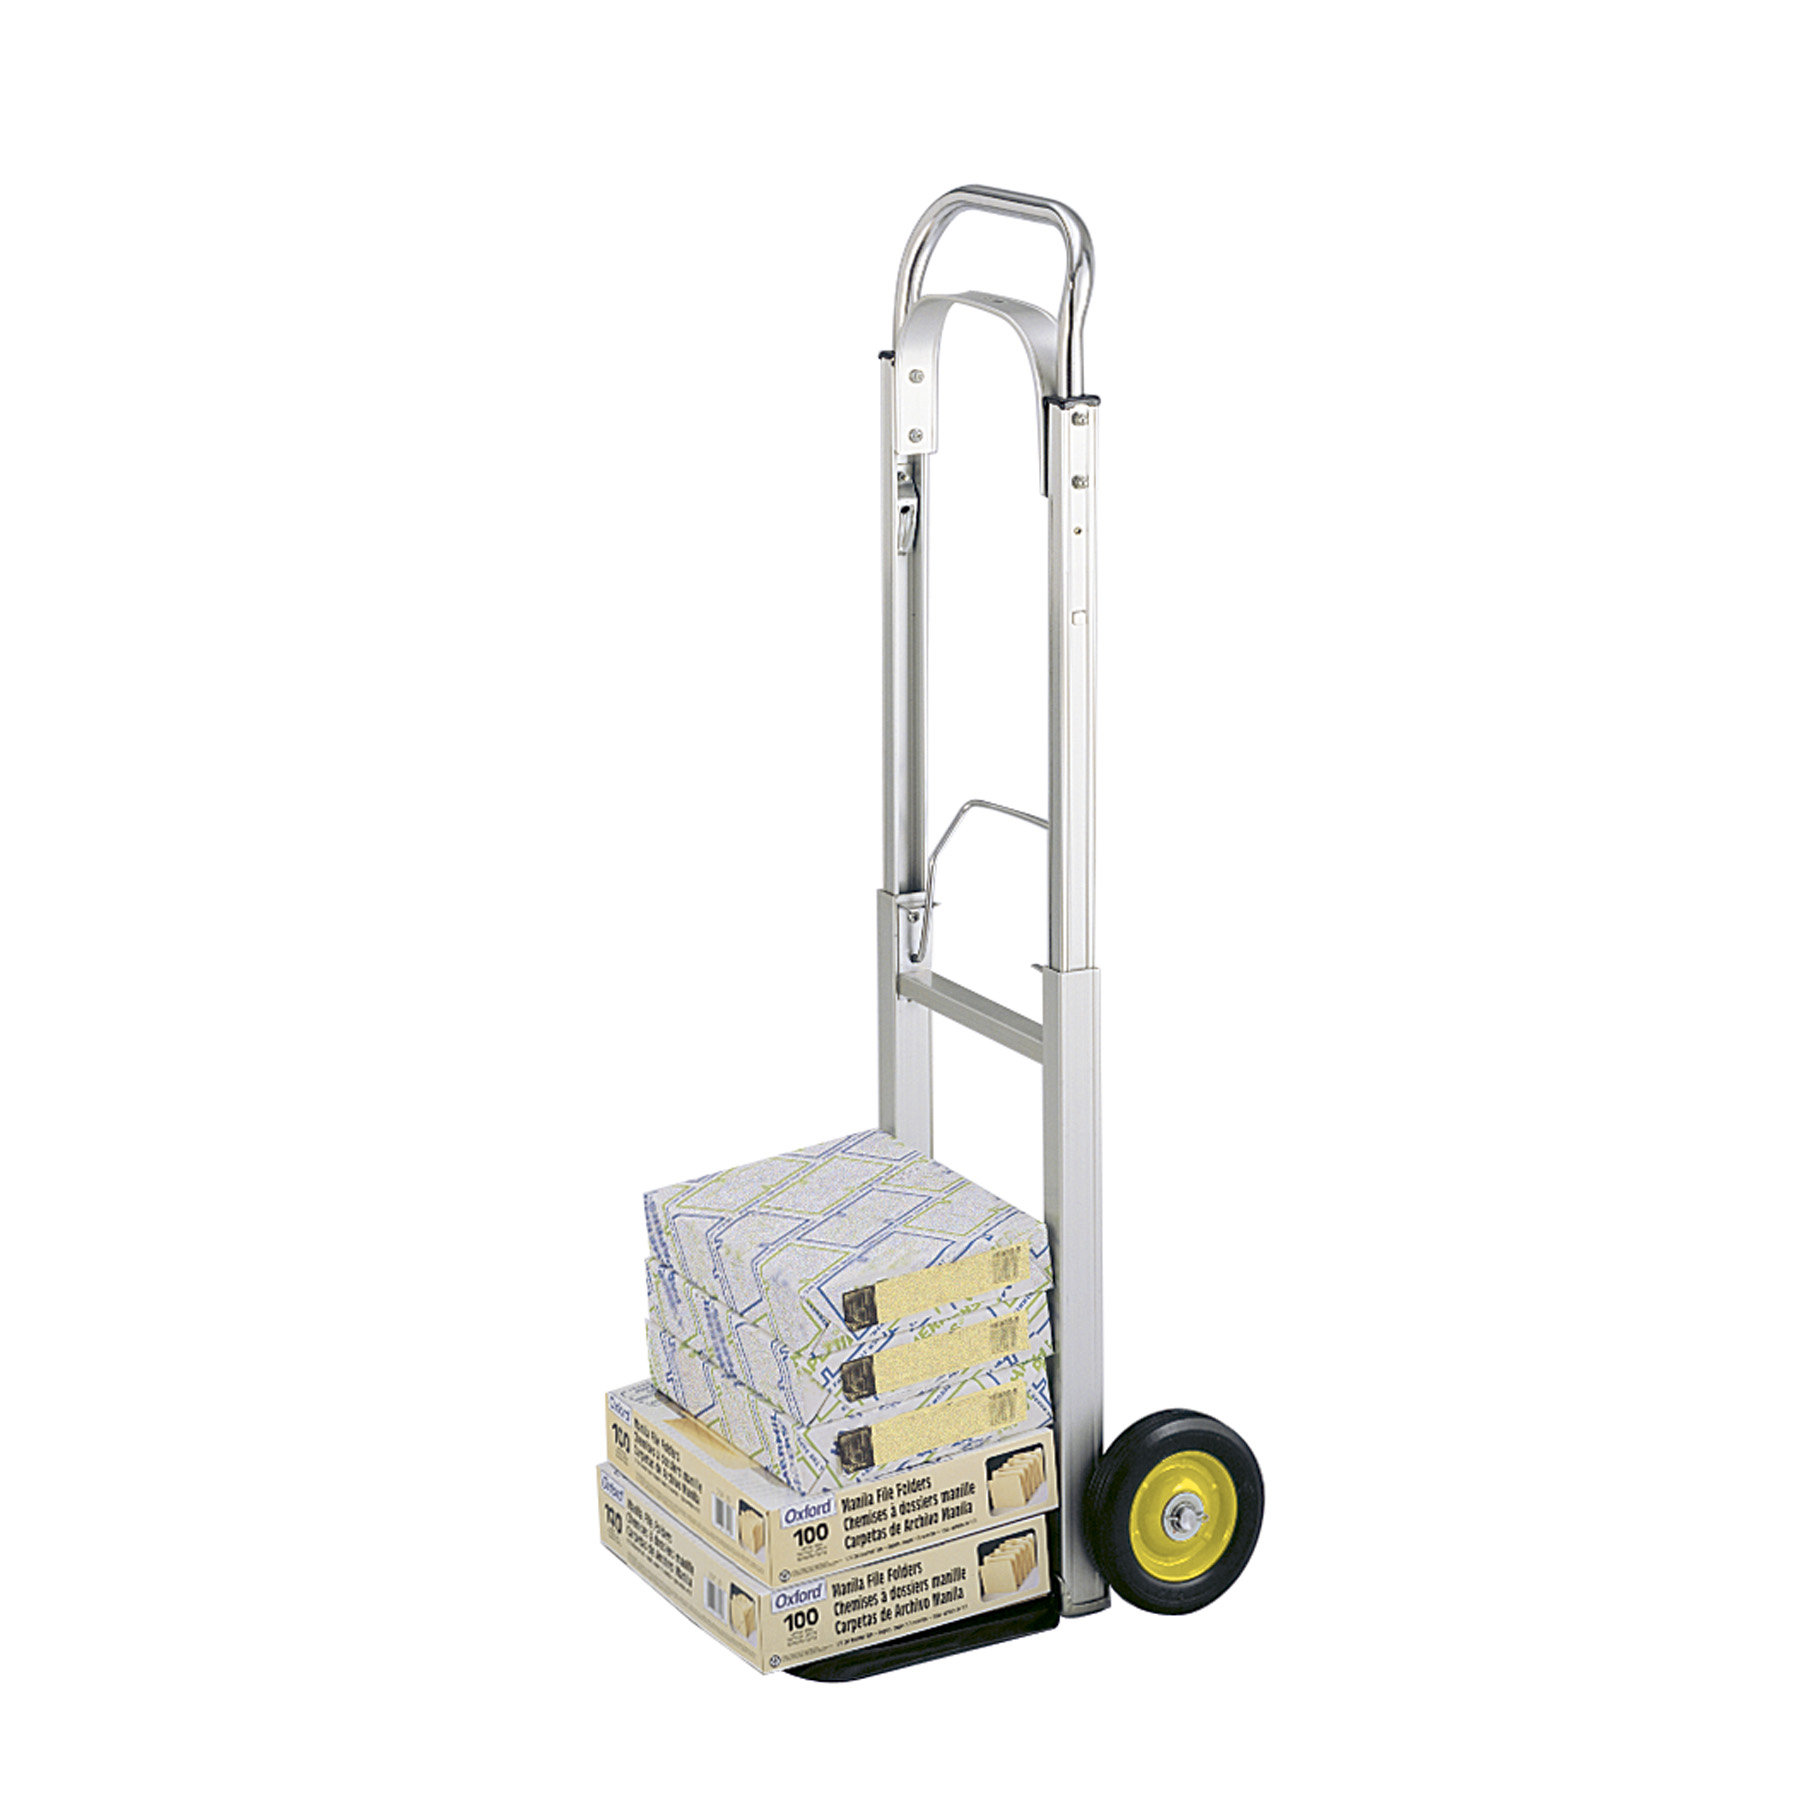 Safco Stow-away Heavy Duty Hand Truck 500lb Capacity 23x24x50 Aluminum 4055NC for sale online 